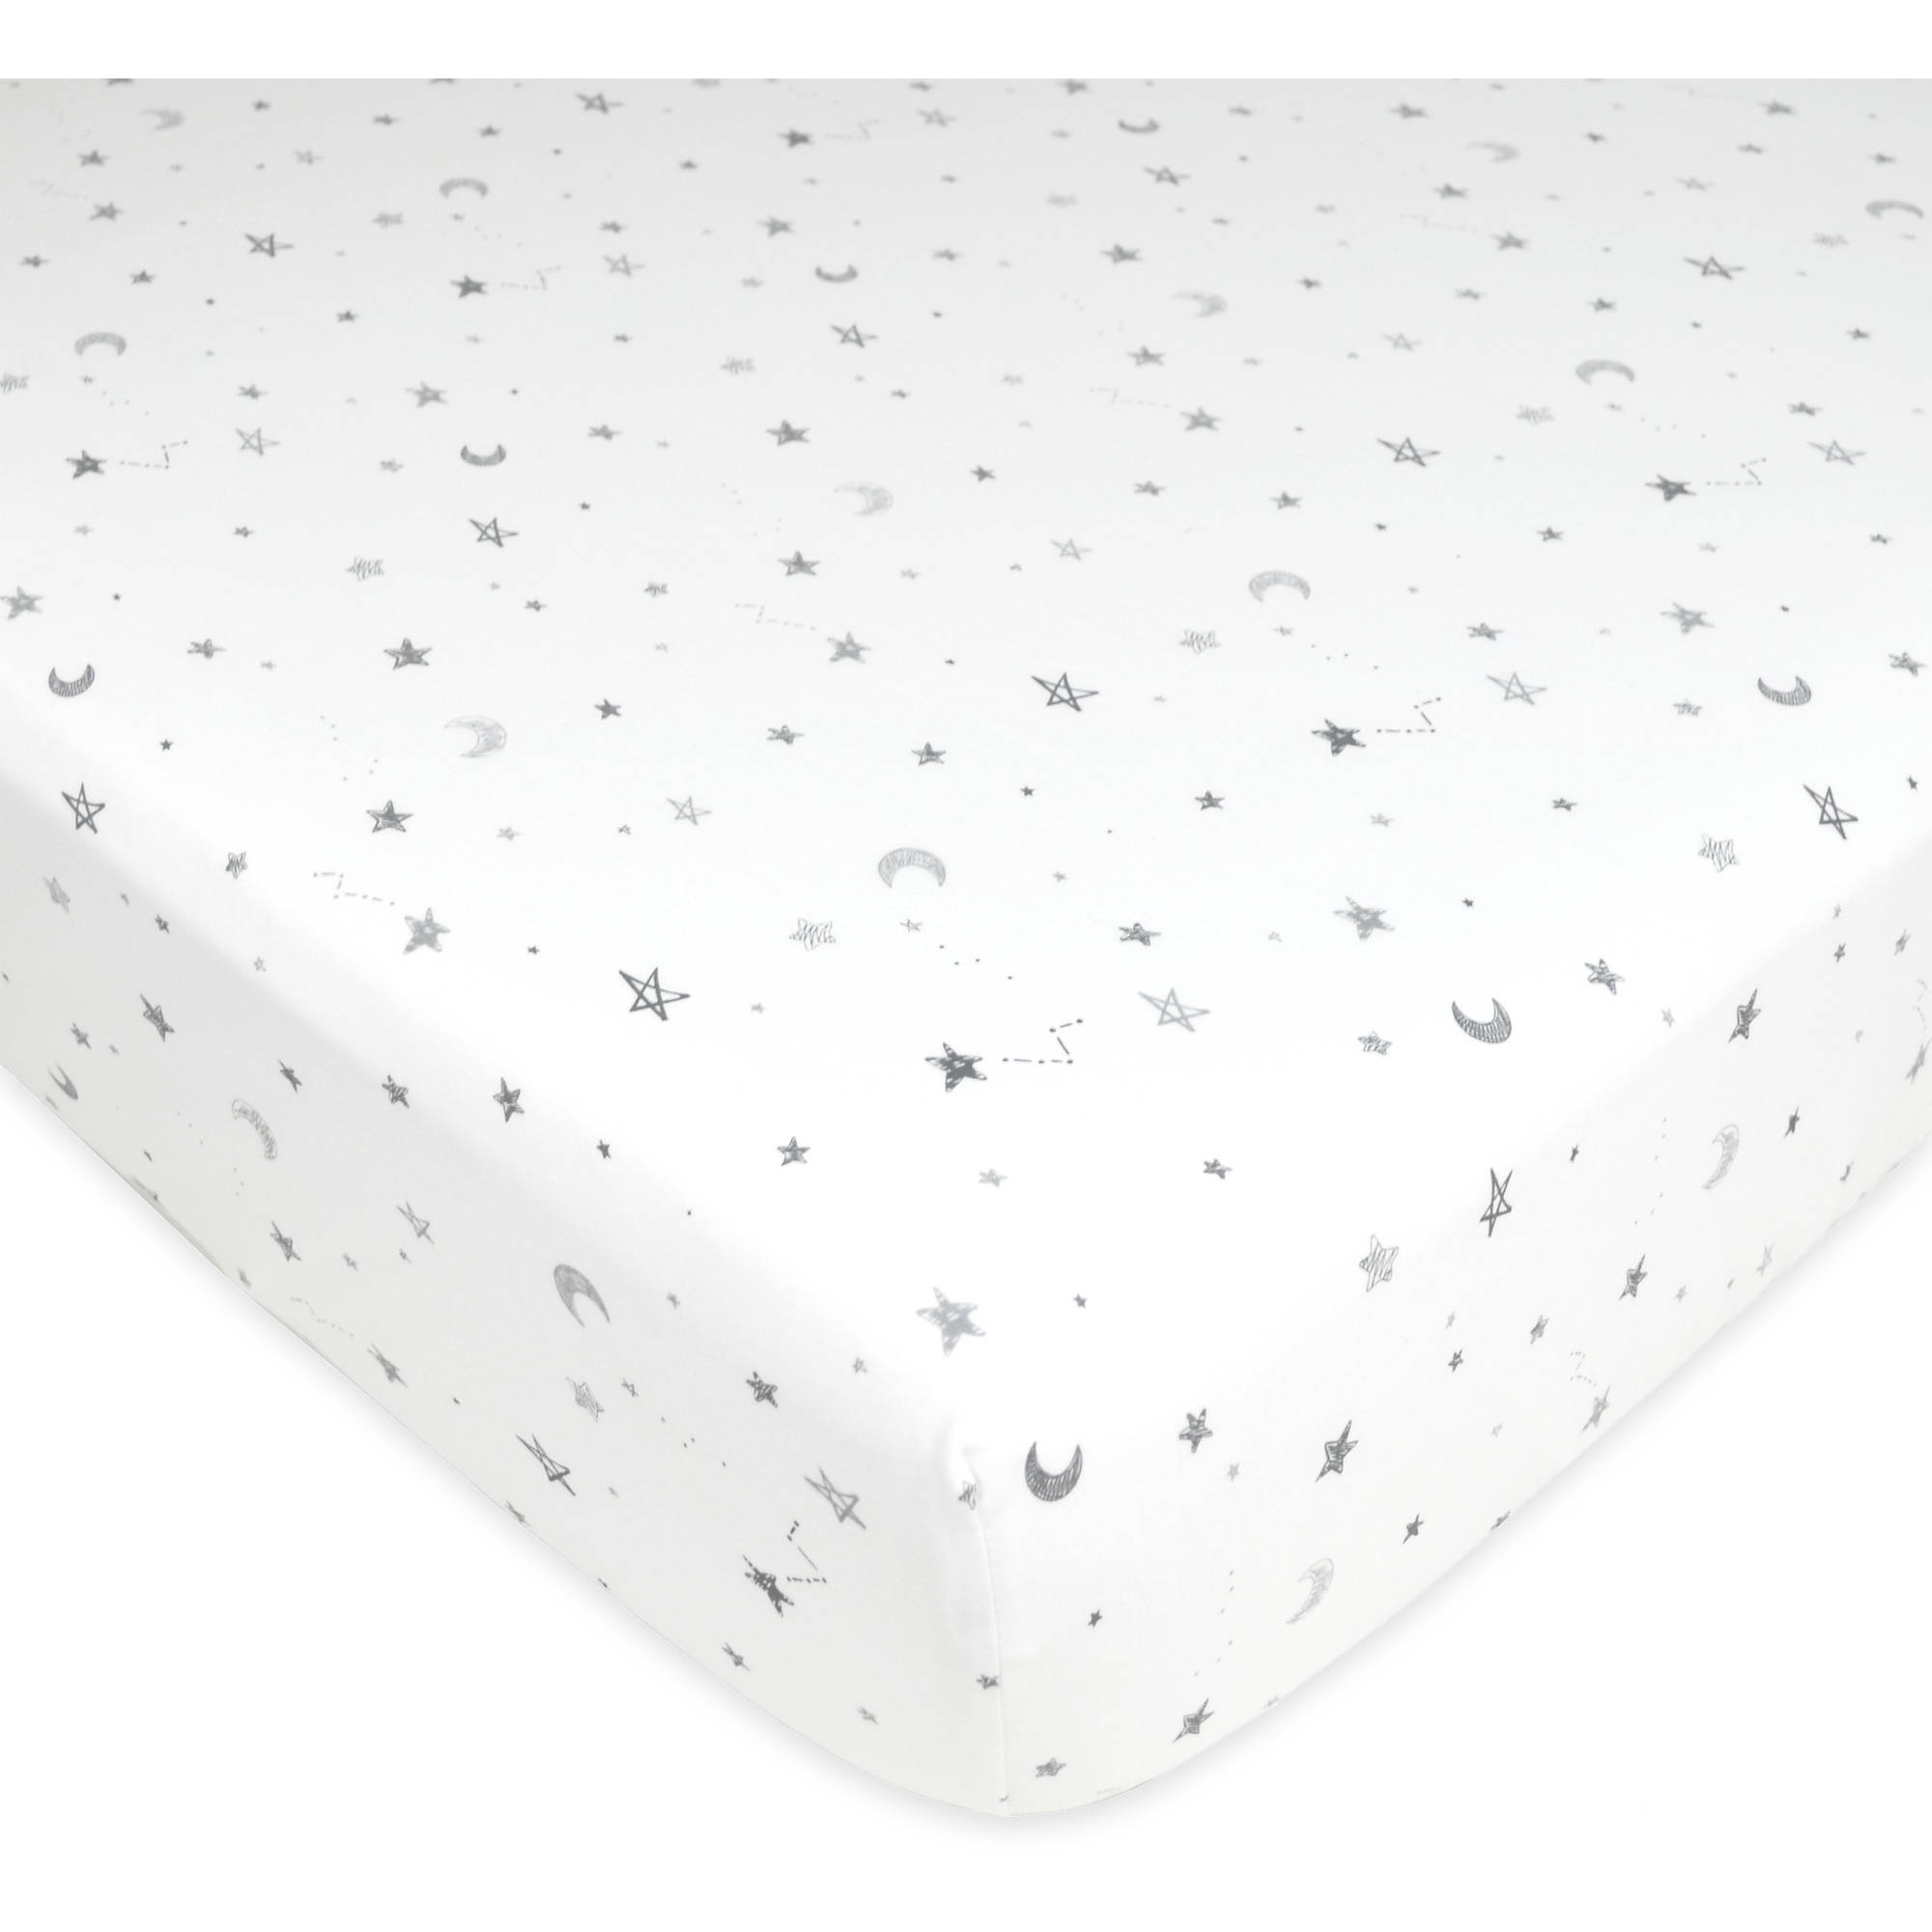 American Baby Company Printed 100% Cotton Jersey Knit Fitted Crib Sheet for Standard Crib and Toddler Mattresses, Grey Stars and Moon, for Boys and Girls - image 1 of 5